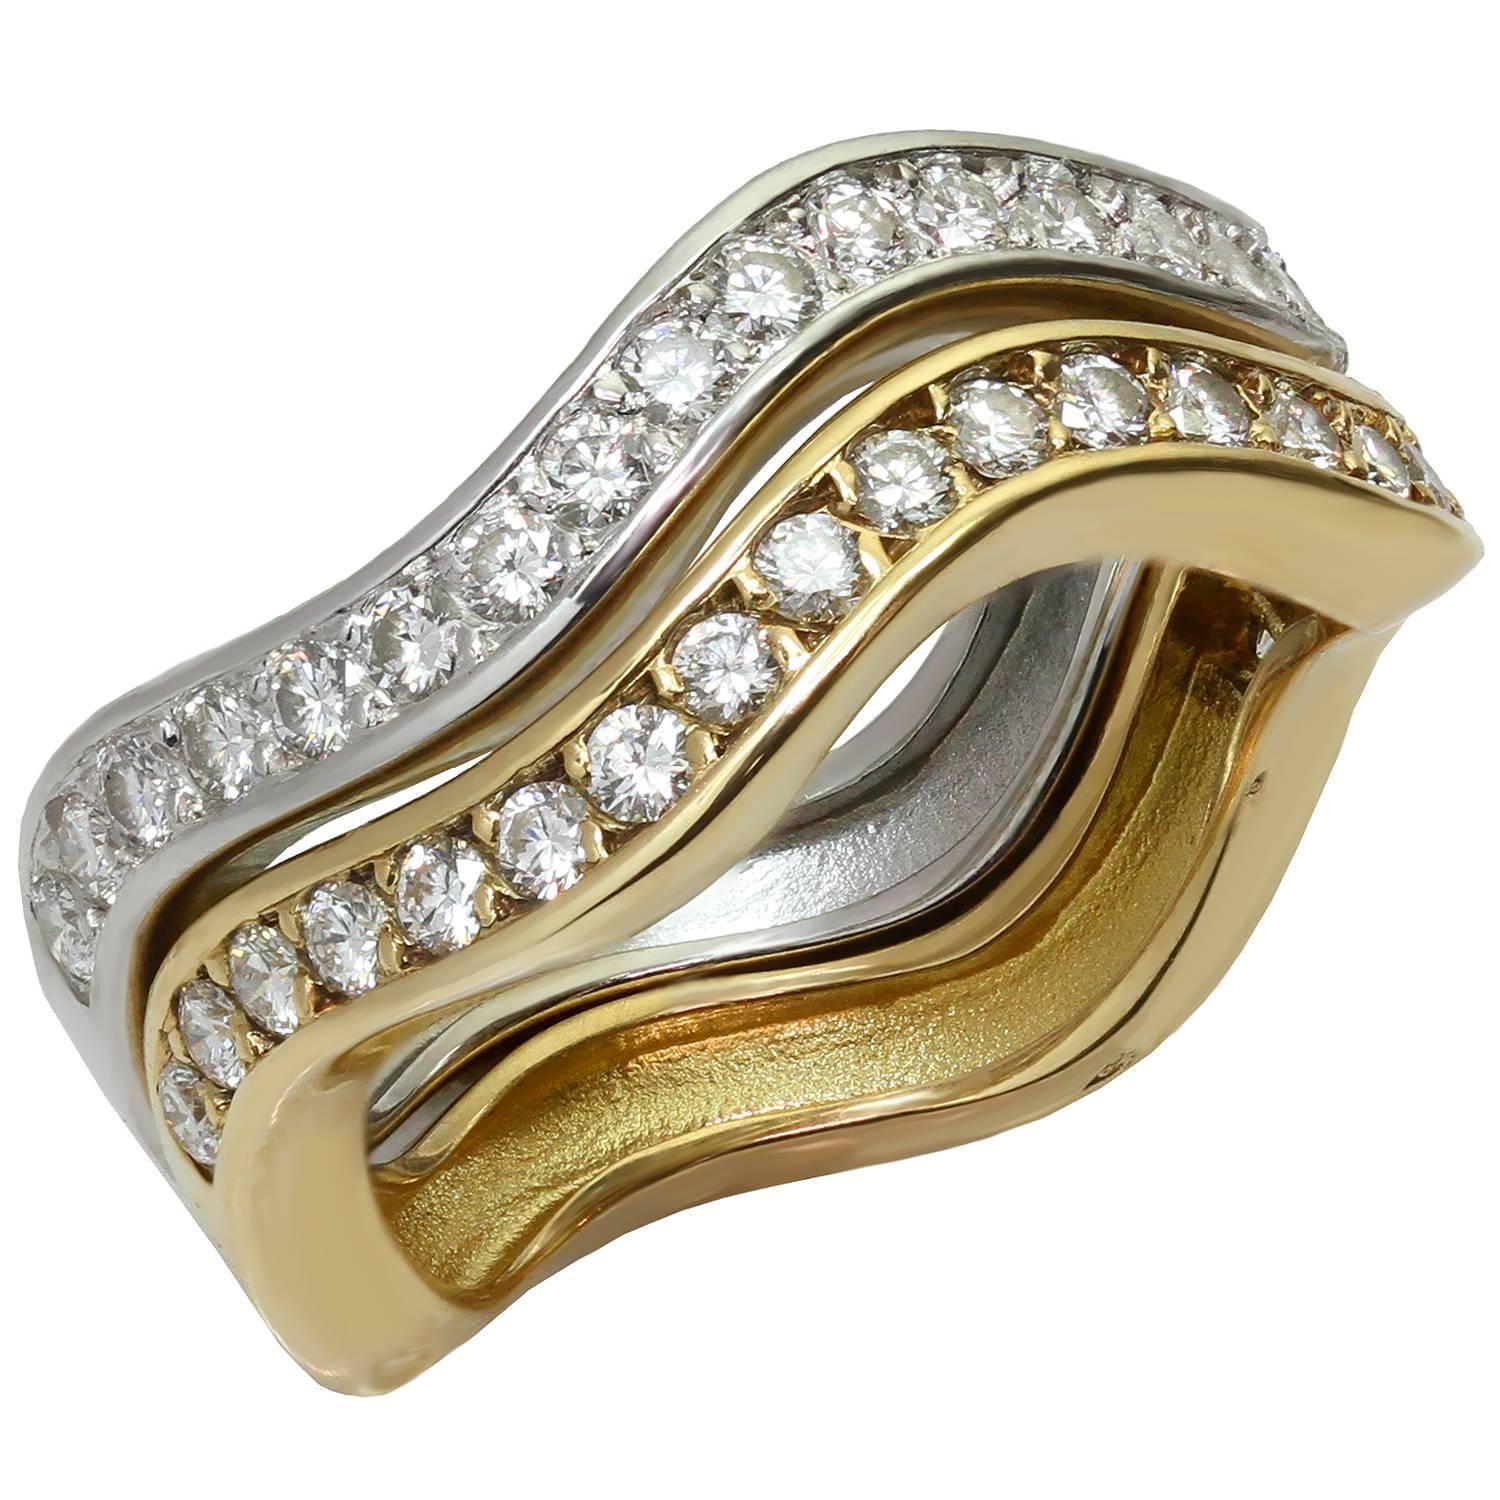 Cartier Love Me Diamond White and Yellow Gold Stackable Rings, Pair